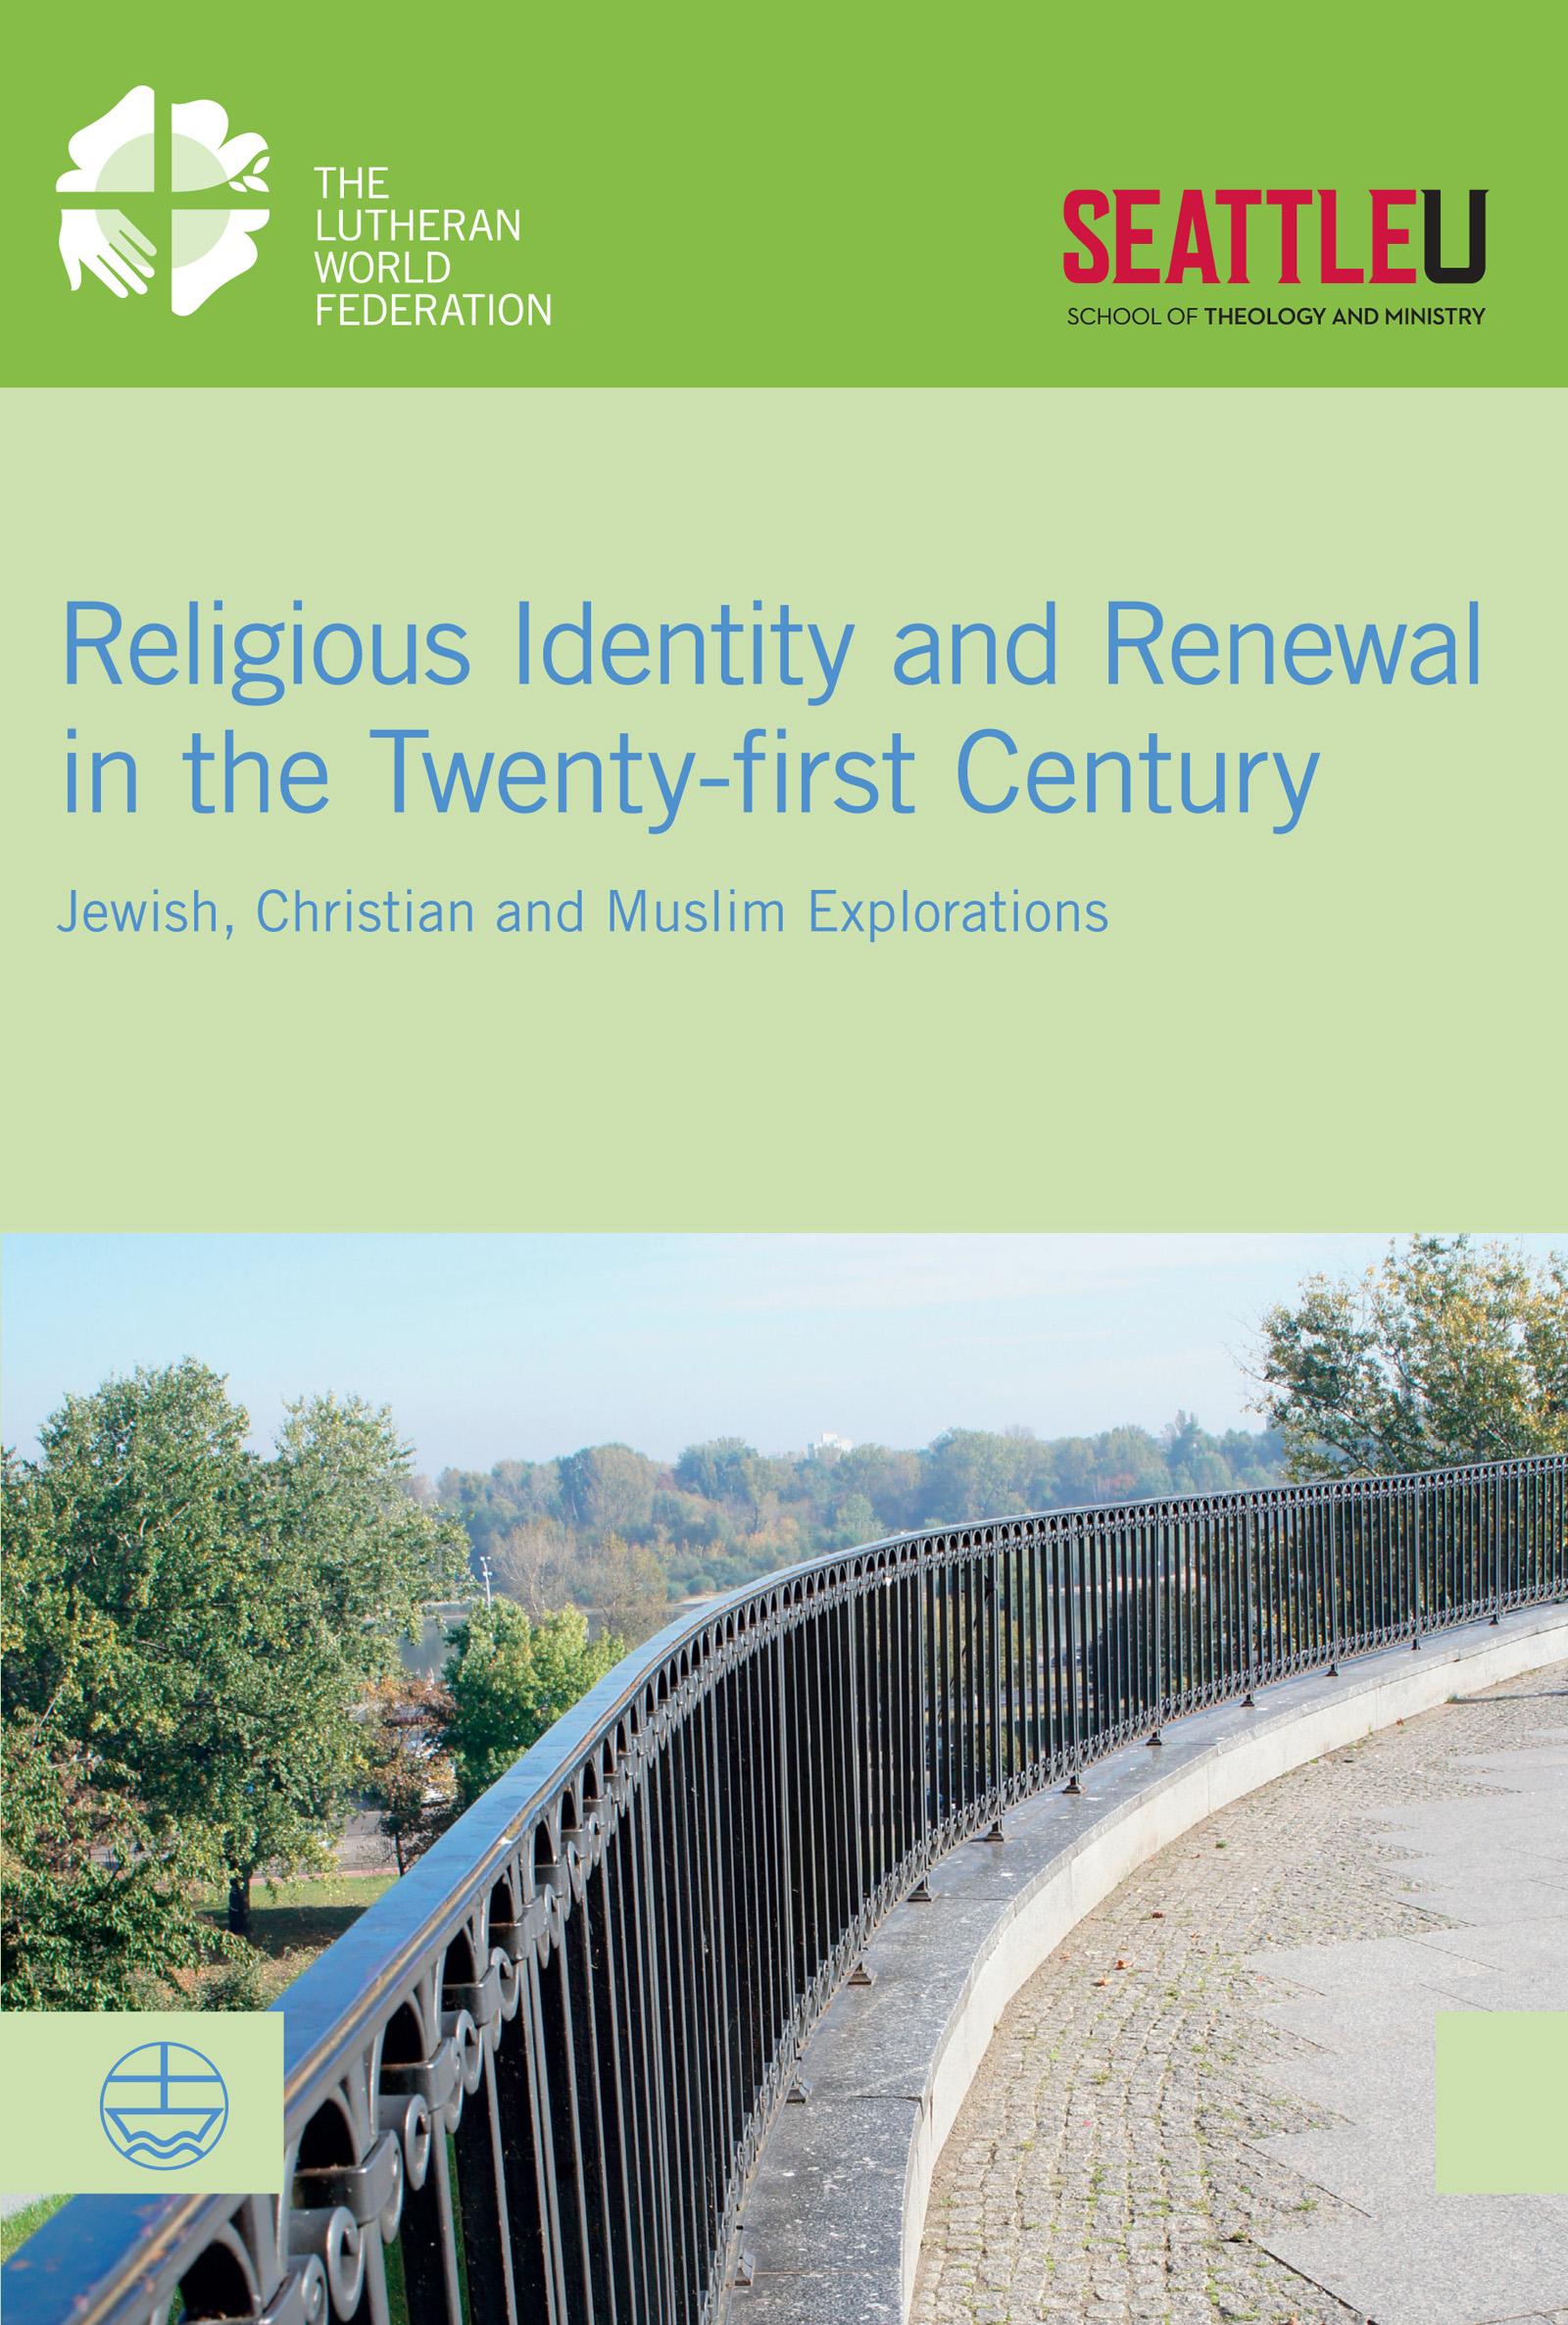 Religious Identity and Renewal in the Twenty-first Century. Jewish, Christian and Muslim Explorations